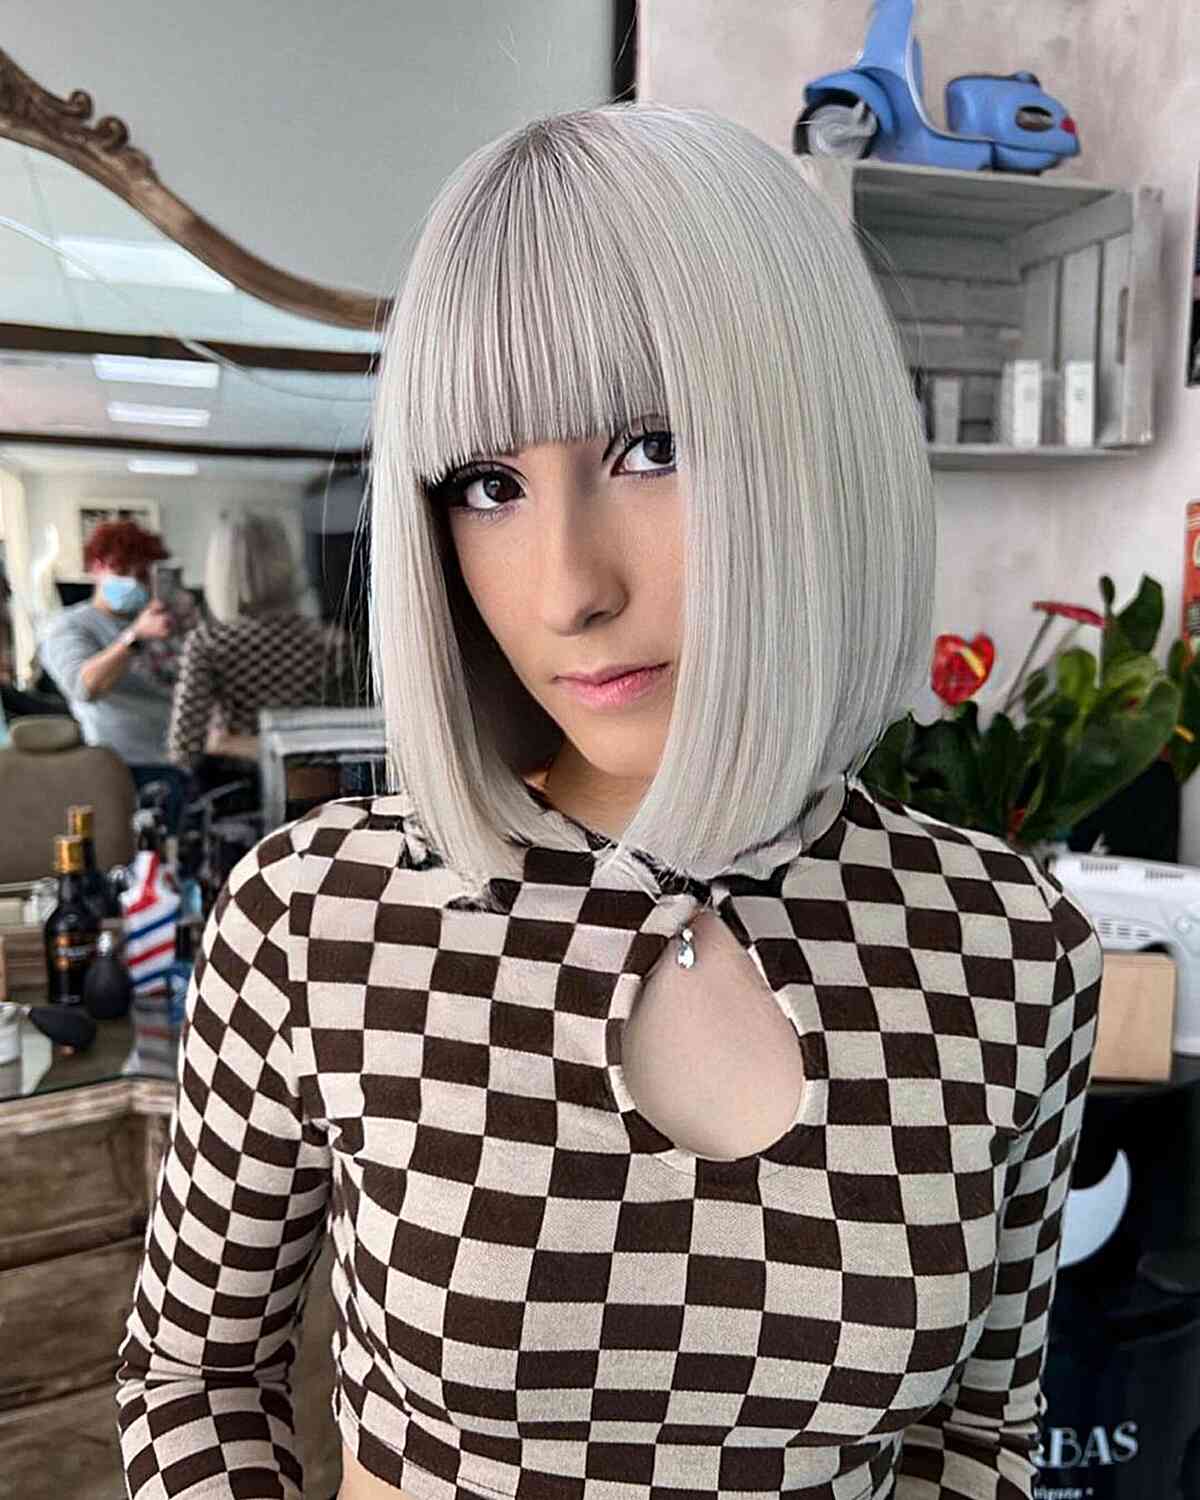 Neck-length Platinum Blunt Bangs on a Blunt Cut for Straight Hair for Long Face Shapes